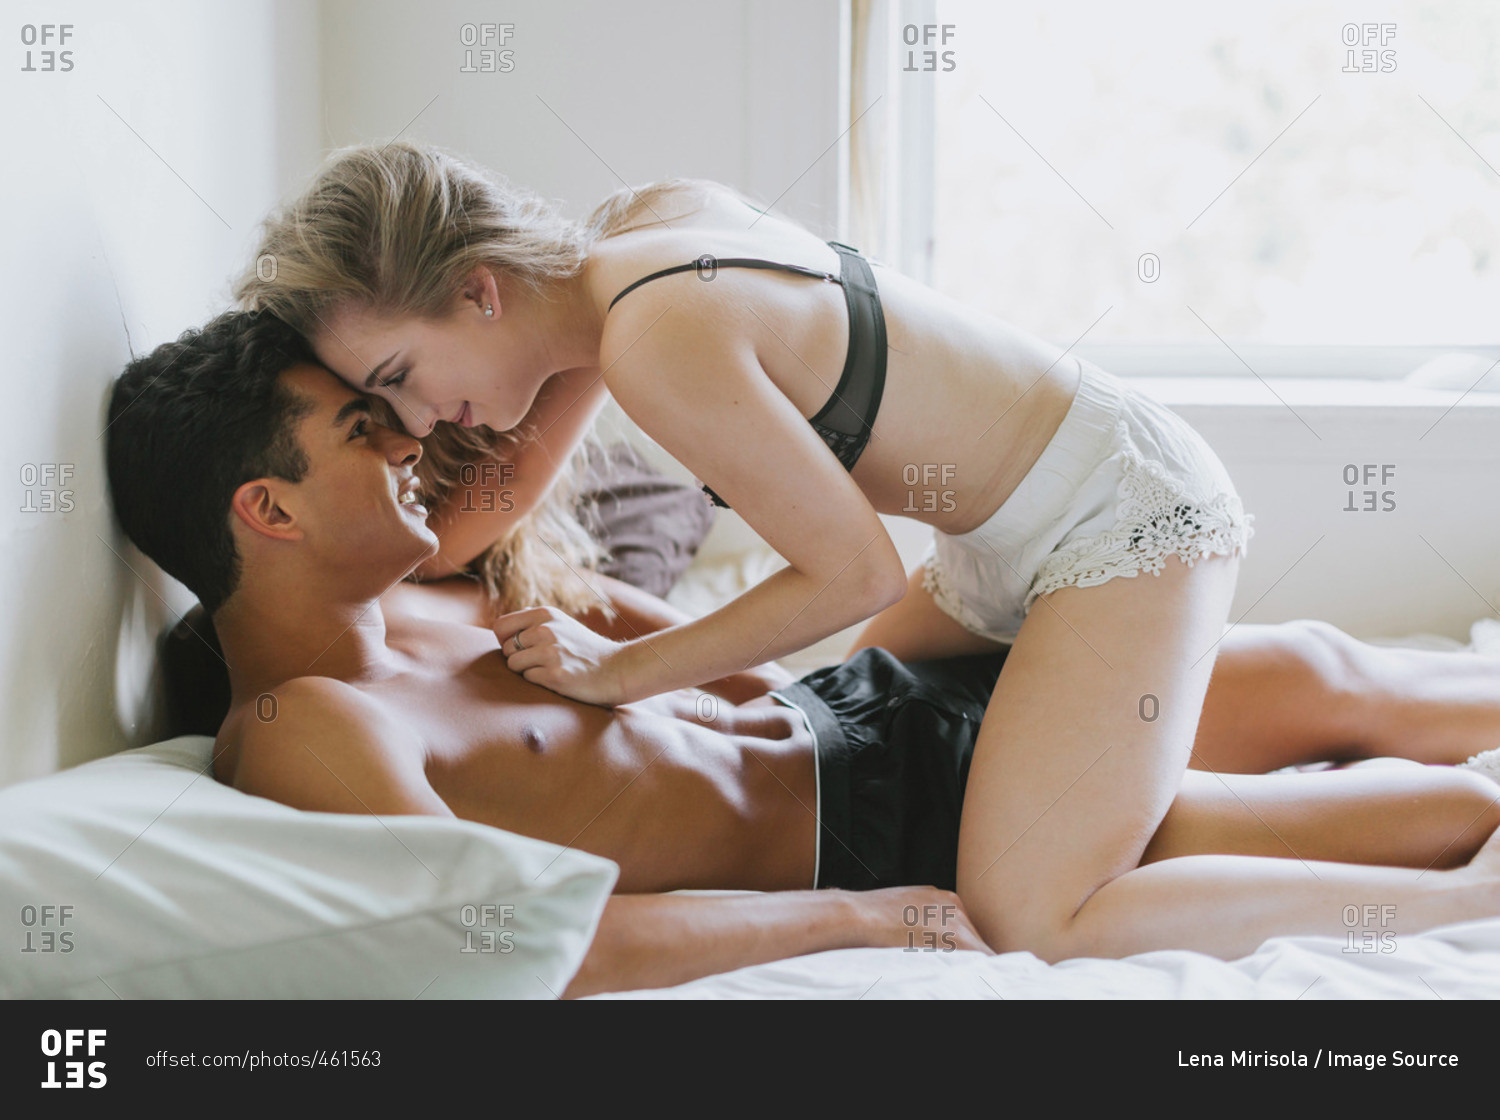 Young woman straddling young man lying on bed. 